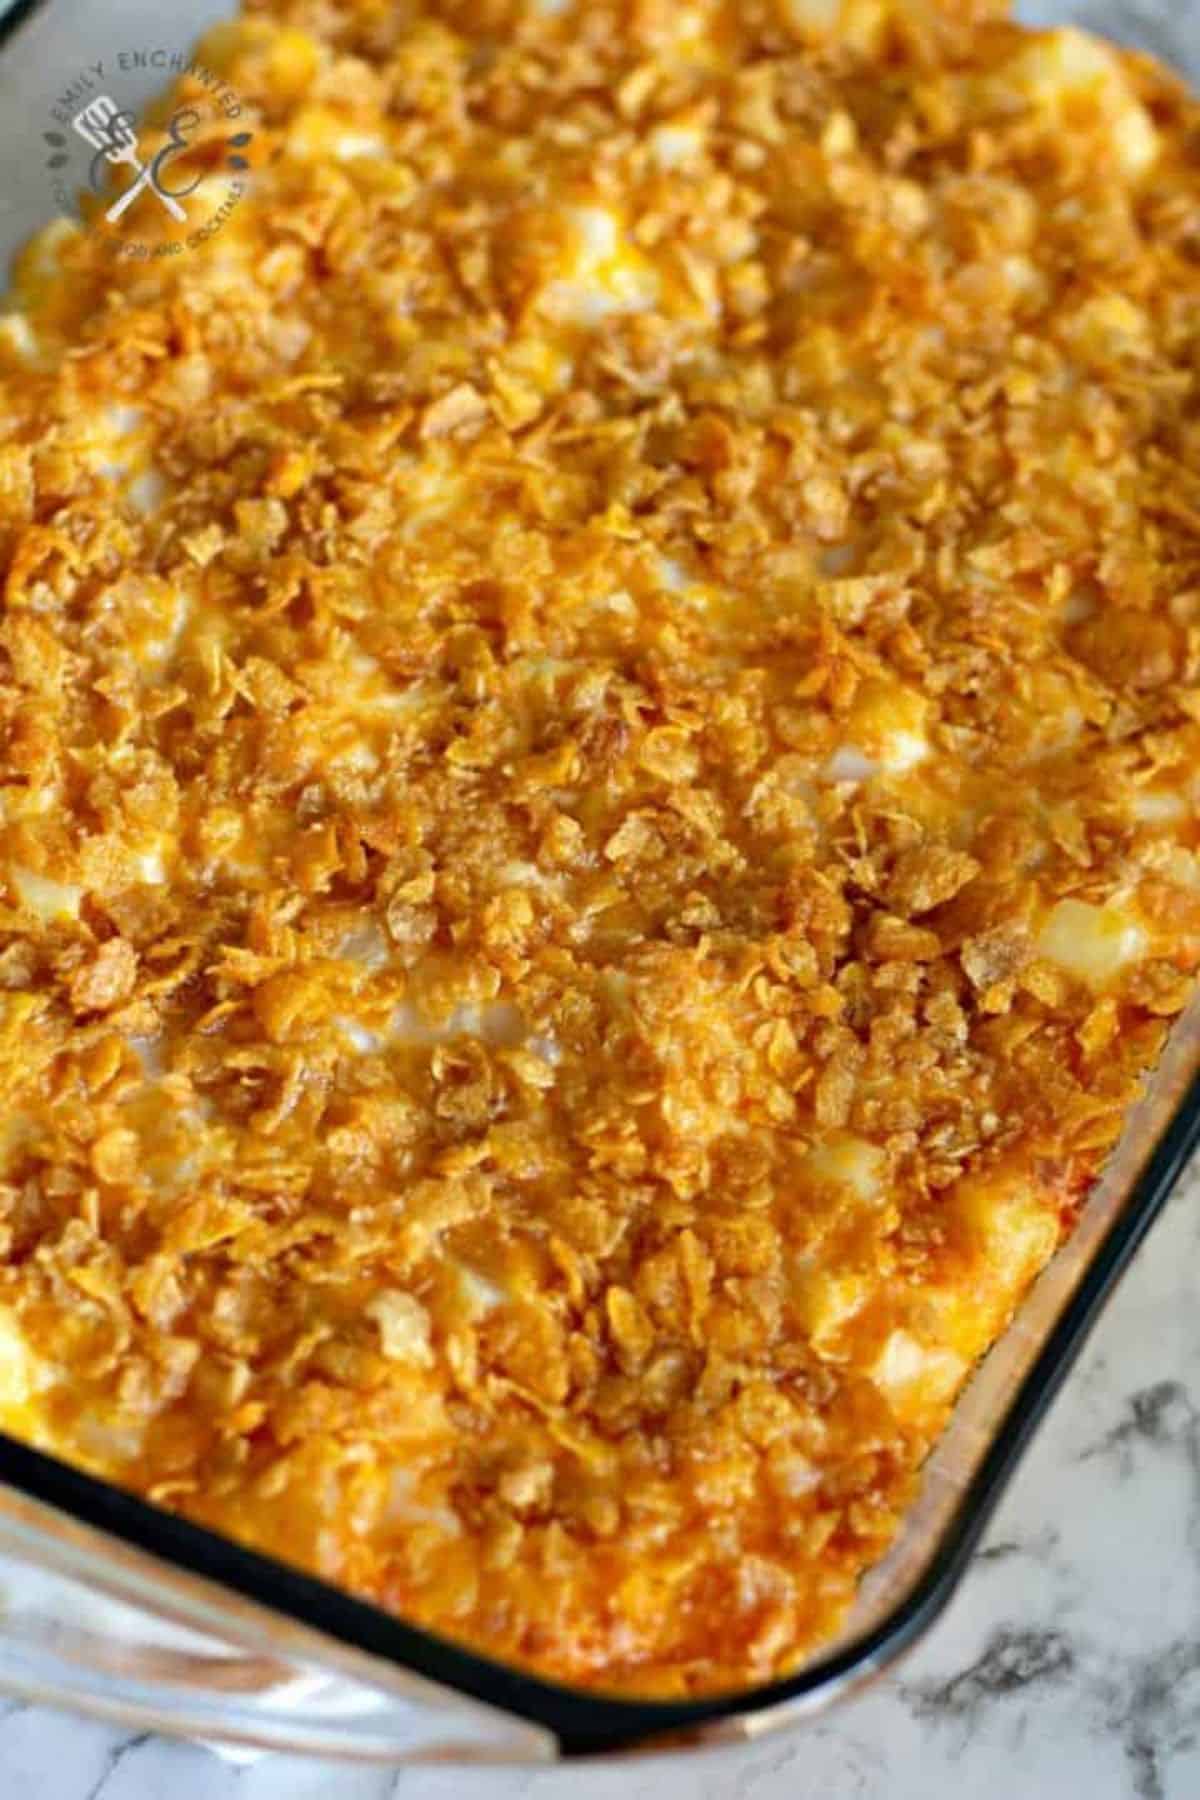 Delicious Funeral Potatoes in a glass casserole.